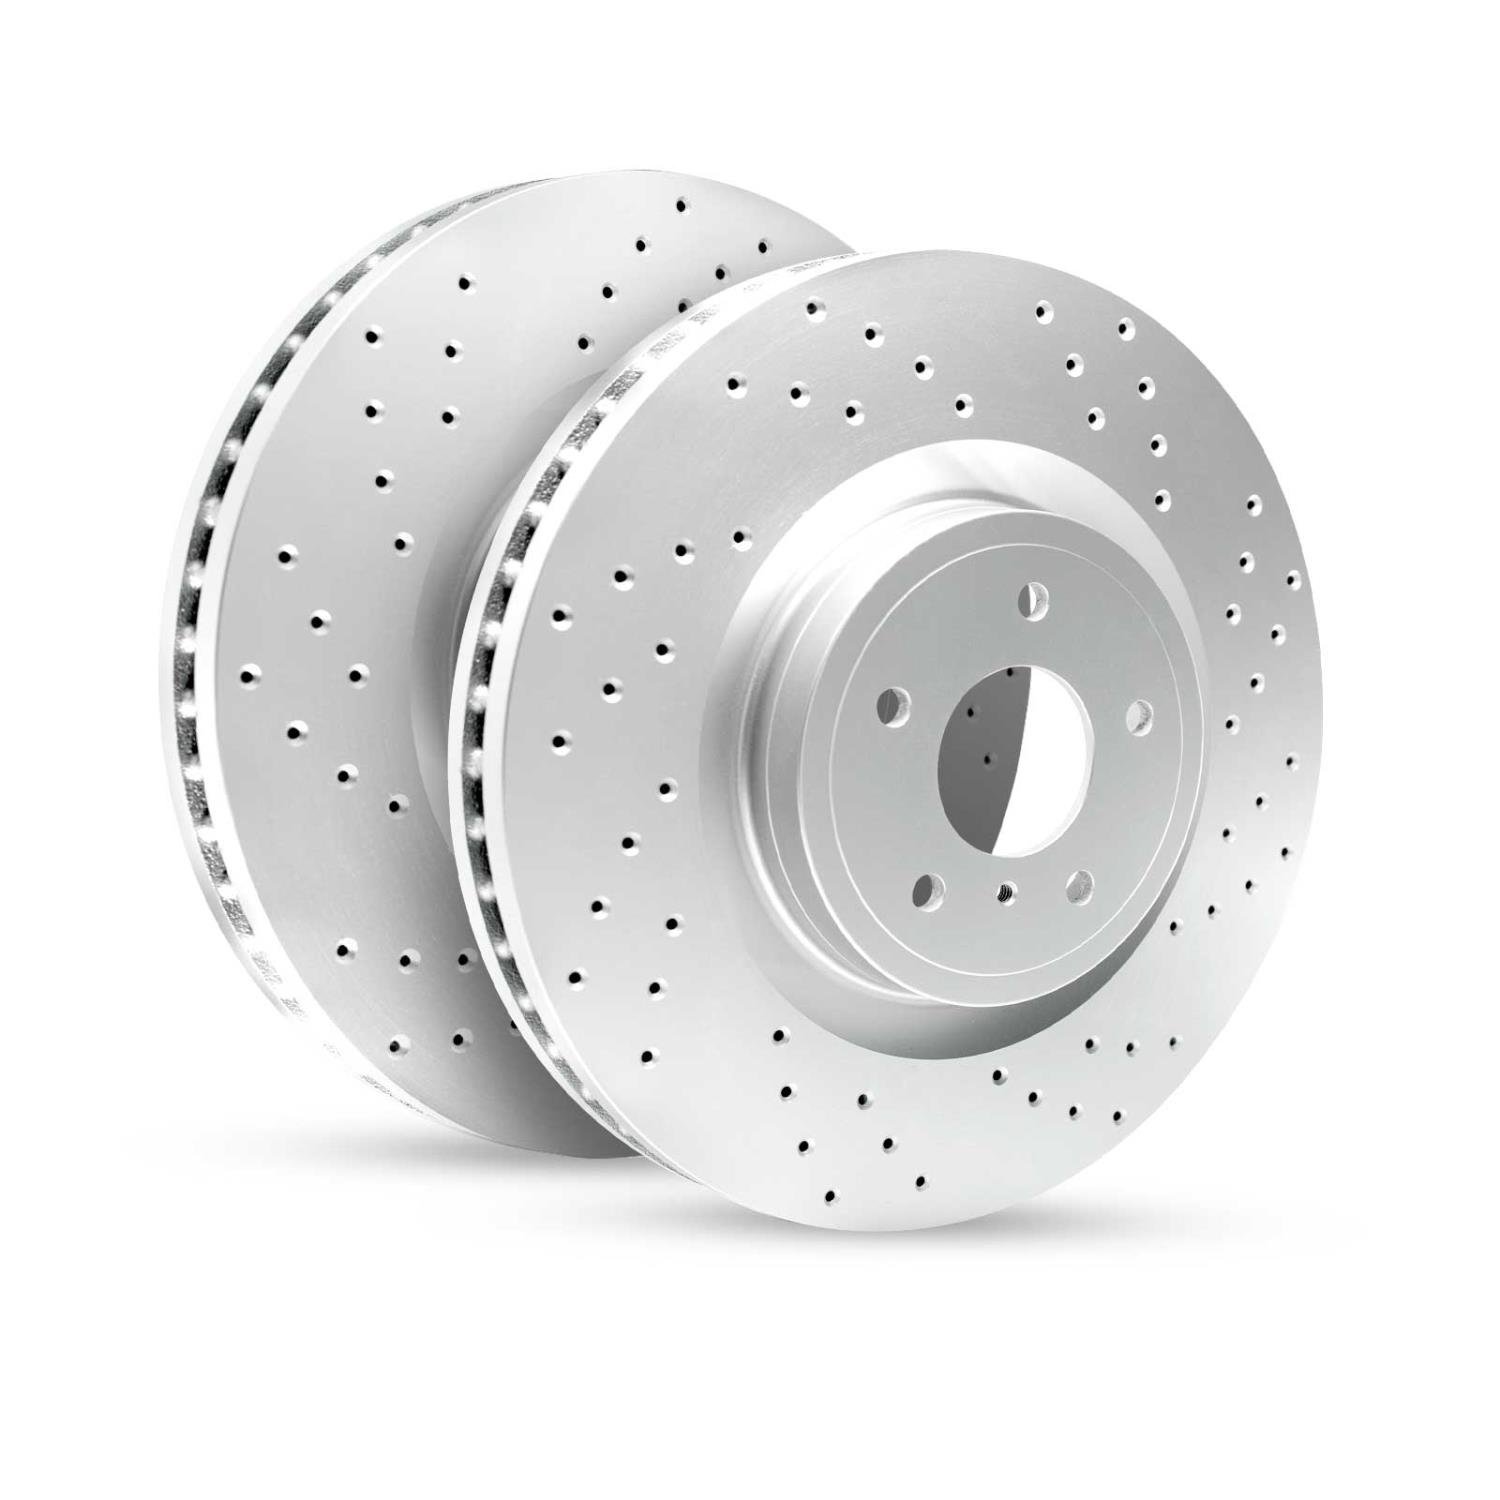 GEO-Carbon Drilled/Slotted Rotors, 2003-2006 BMW, Position: Rear